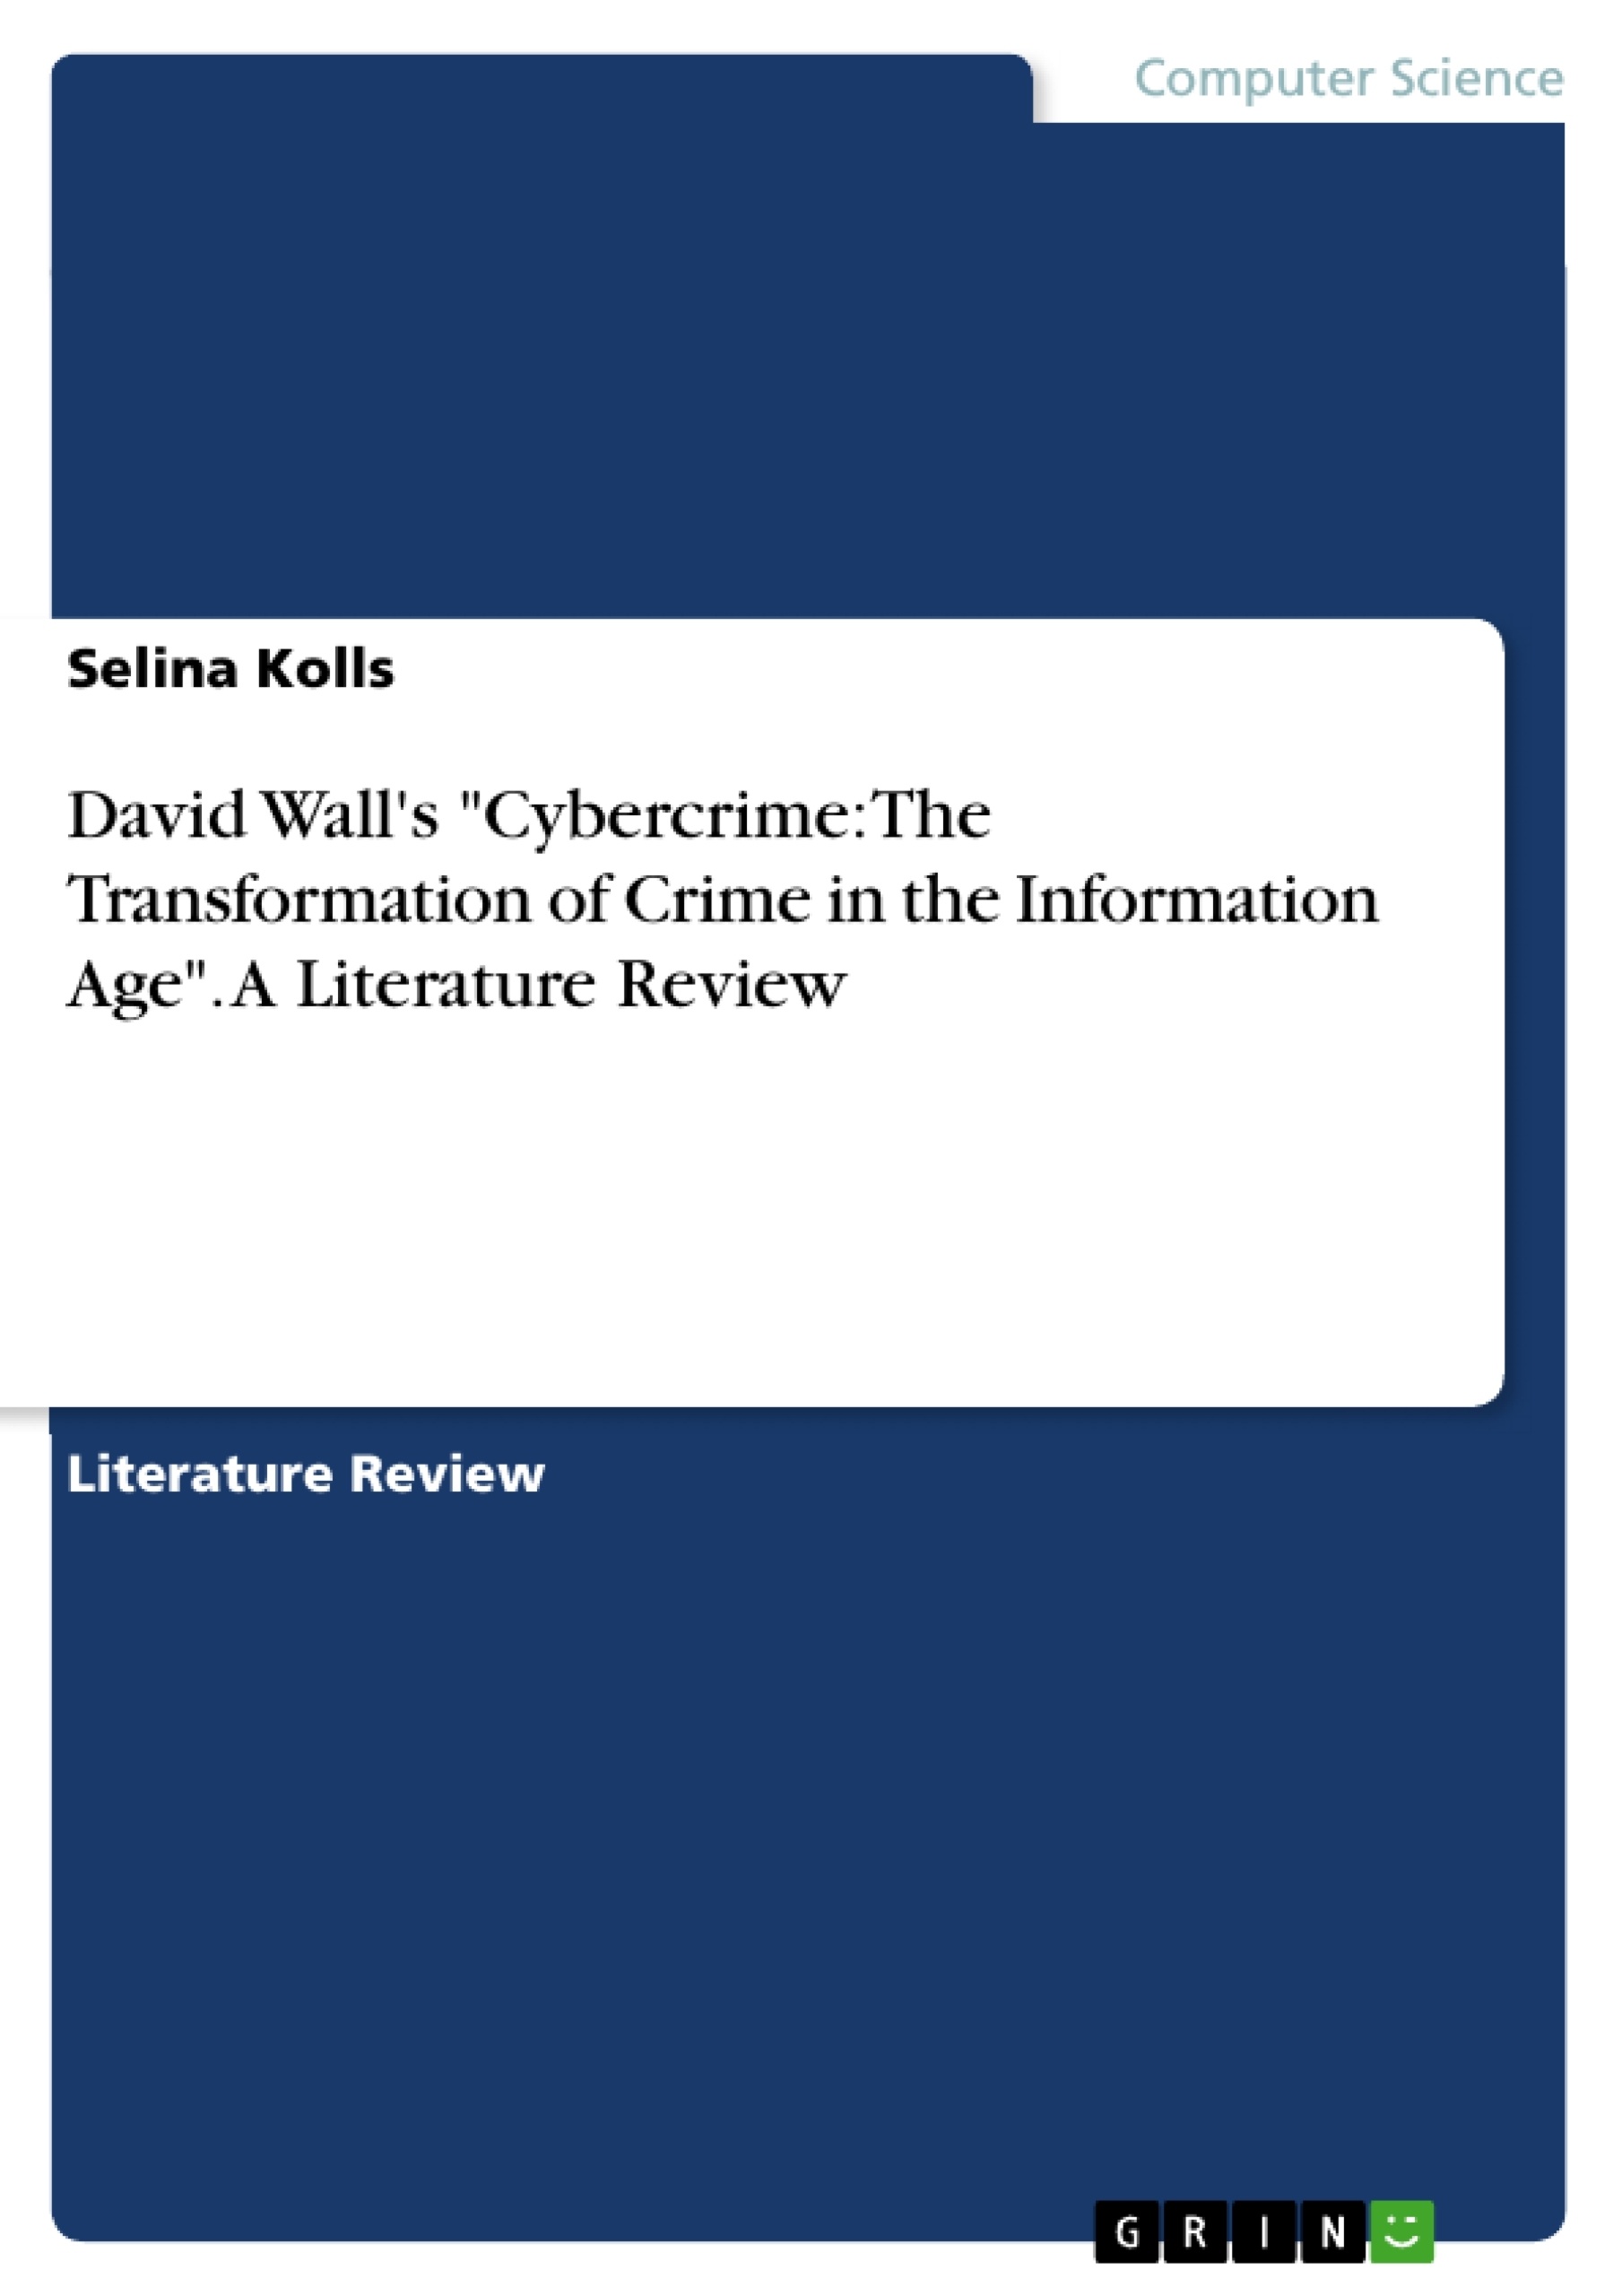 Título: David Wall's "Cybercrime: The Transformation of Crime in the Information Age". A Literature Review